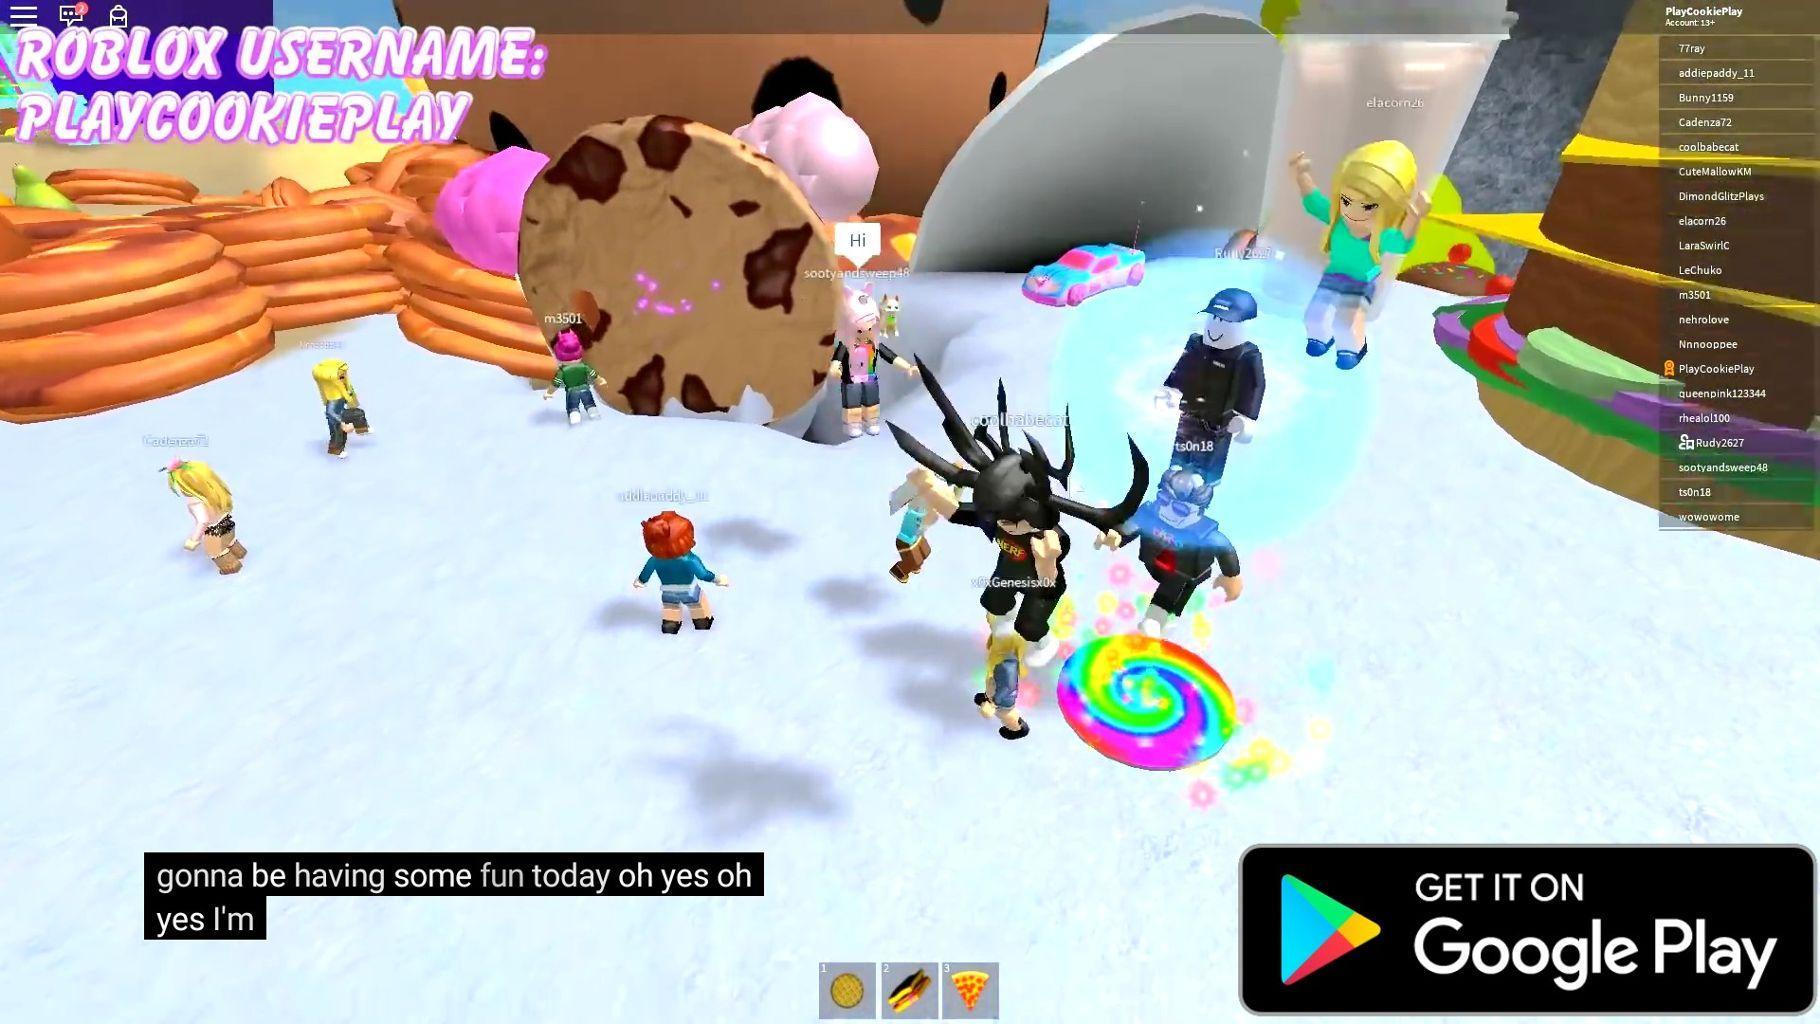 Guide For Cookie Swirl C Roblox For Android Apk Download - guide for cookie swirl c roblox 1 0 apk android 3 0 honeycomb apk tools